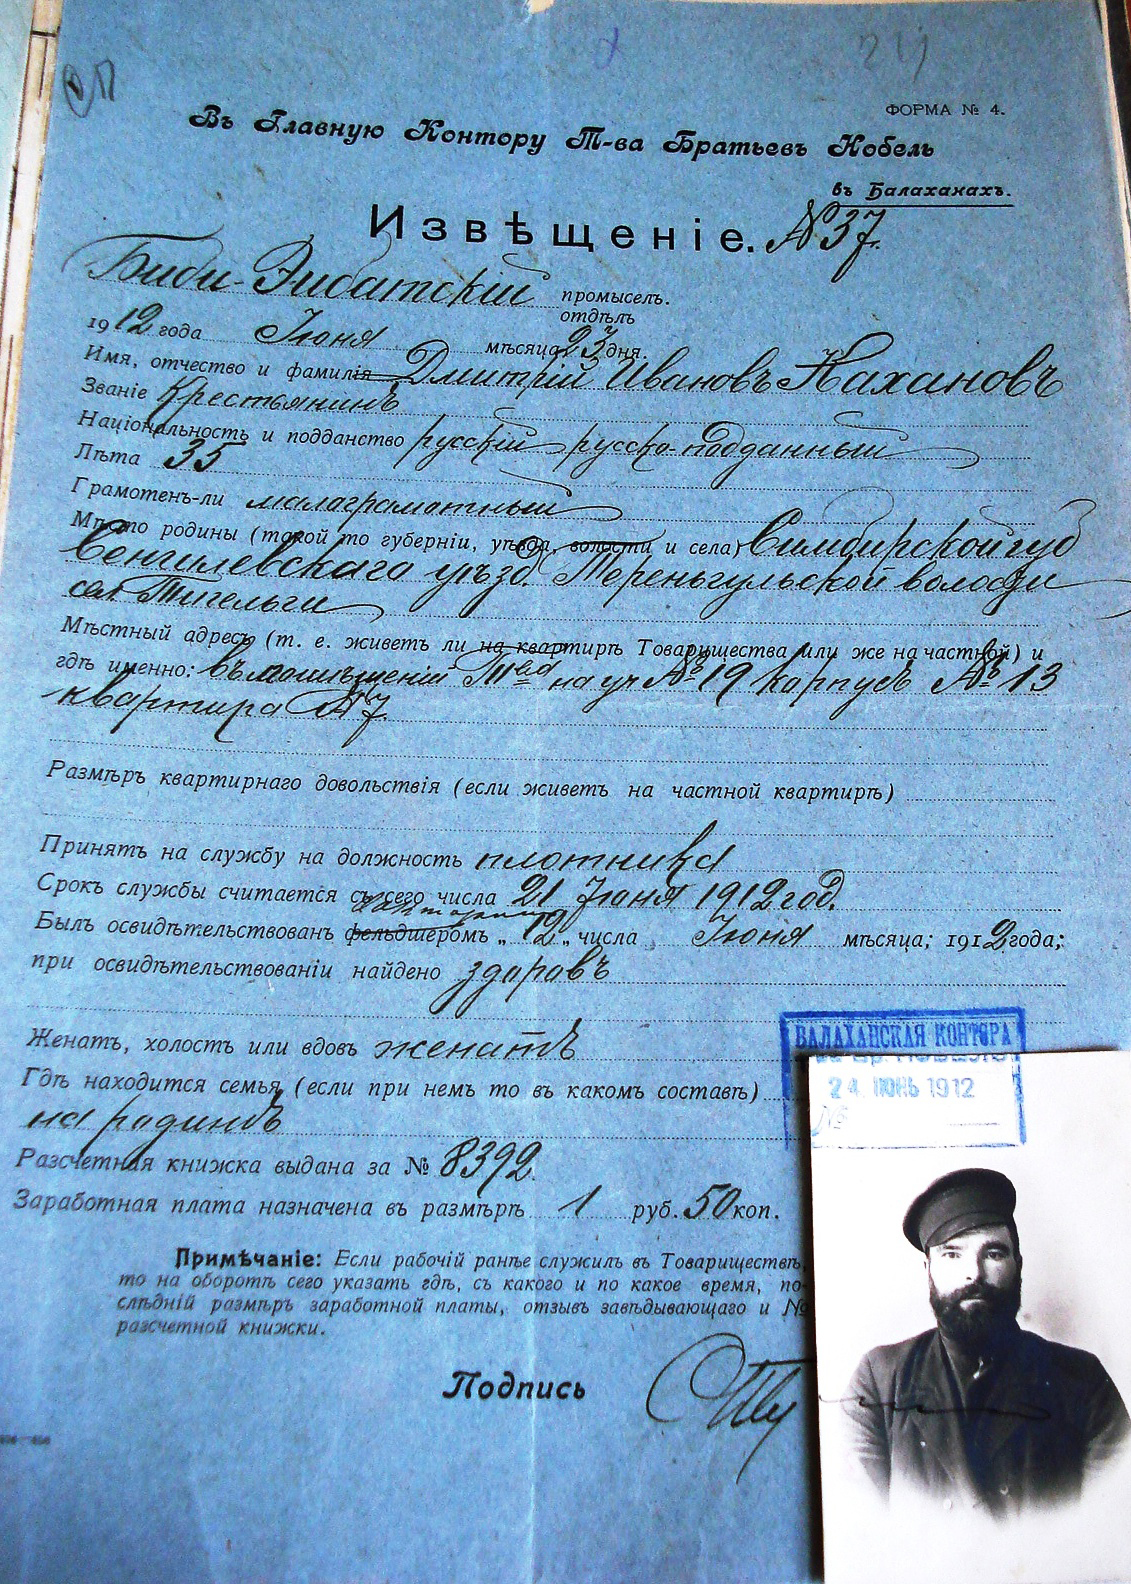 Work place – “Nobel Brothers’ Oil Producing Association”, Bibi-Heybet Oil FieldsDate for hiring – June 23, 1912 Russian worker, has Russian citizenship Peasant, 35 years old, Semi literate, Married. He came from Simbirskaia guberniia, Sengilevskii uezd, Teren’gulevskaia volost’, Tigelga village. His salary – 1 Rouble 50 cents per day.